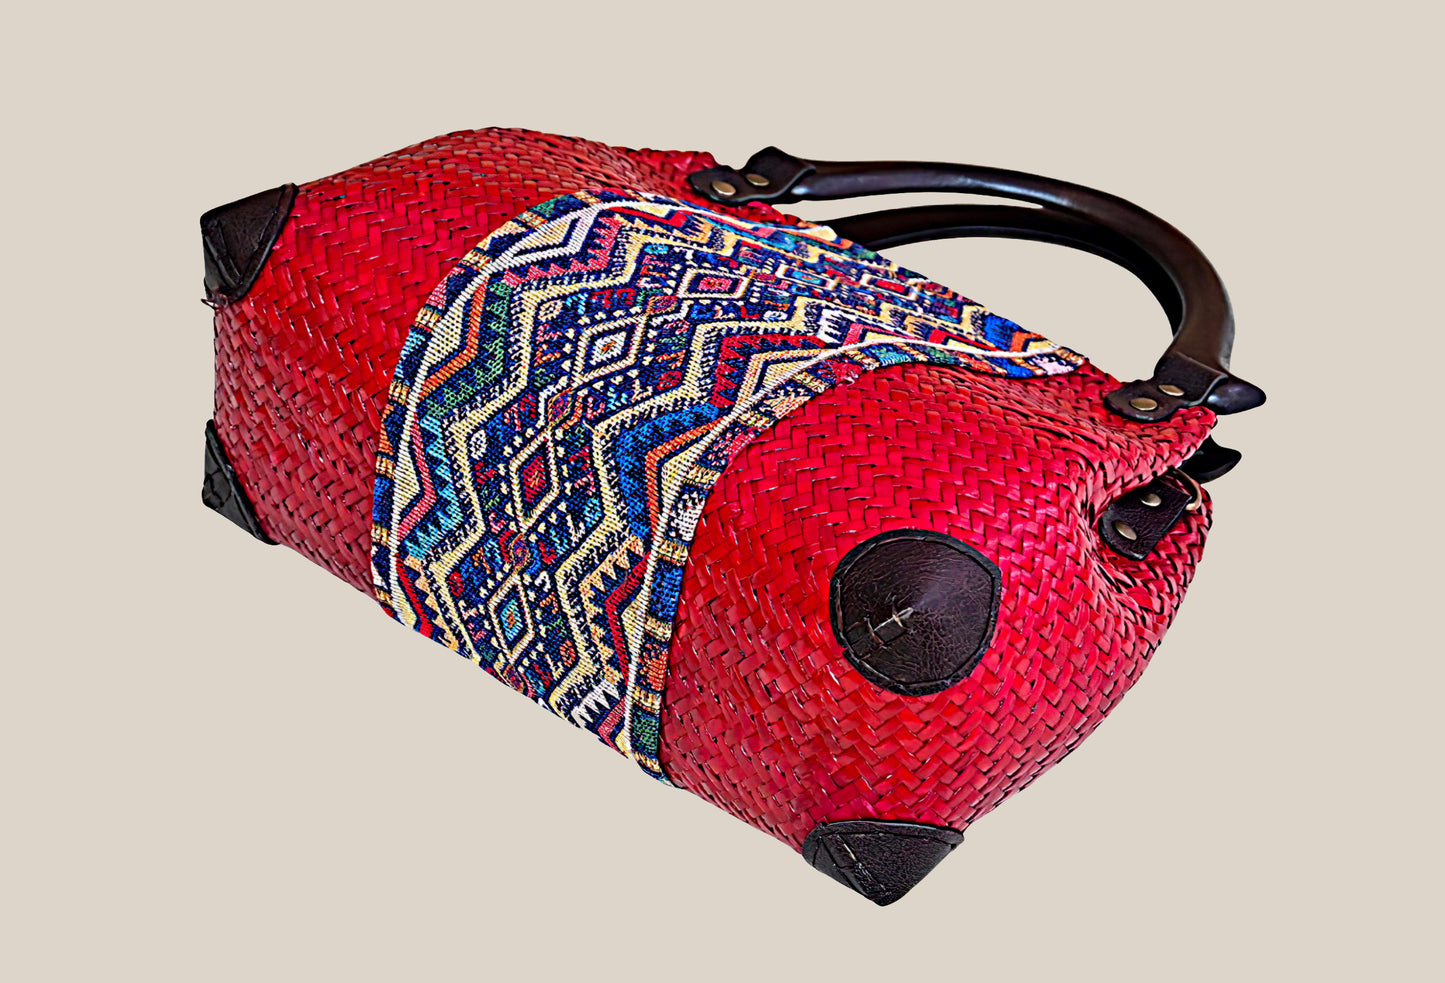 Red Woven Straw Bag